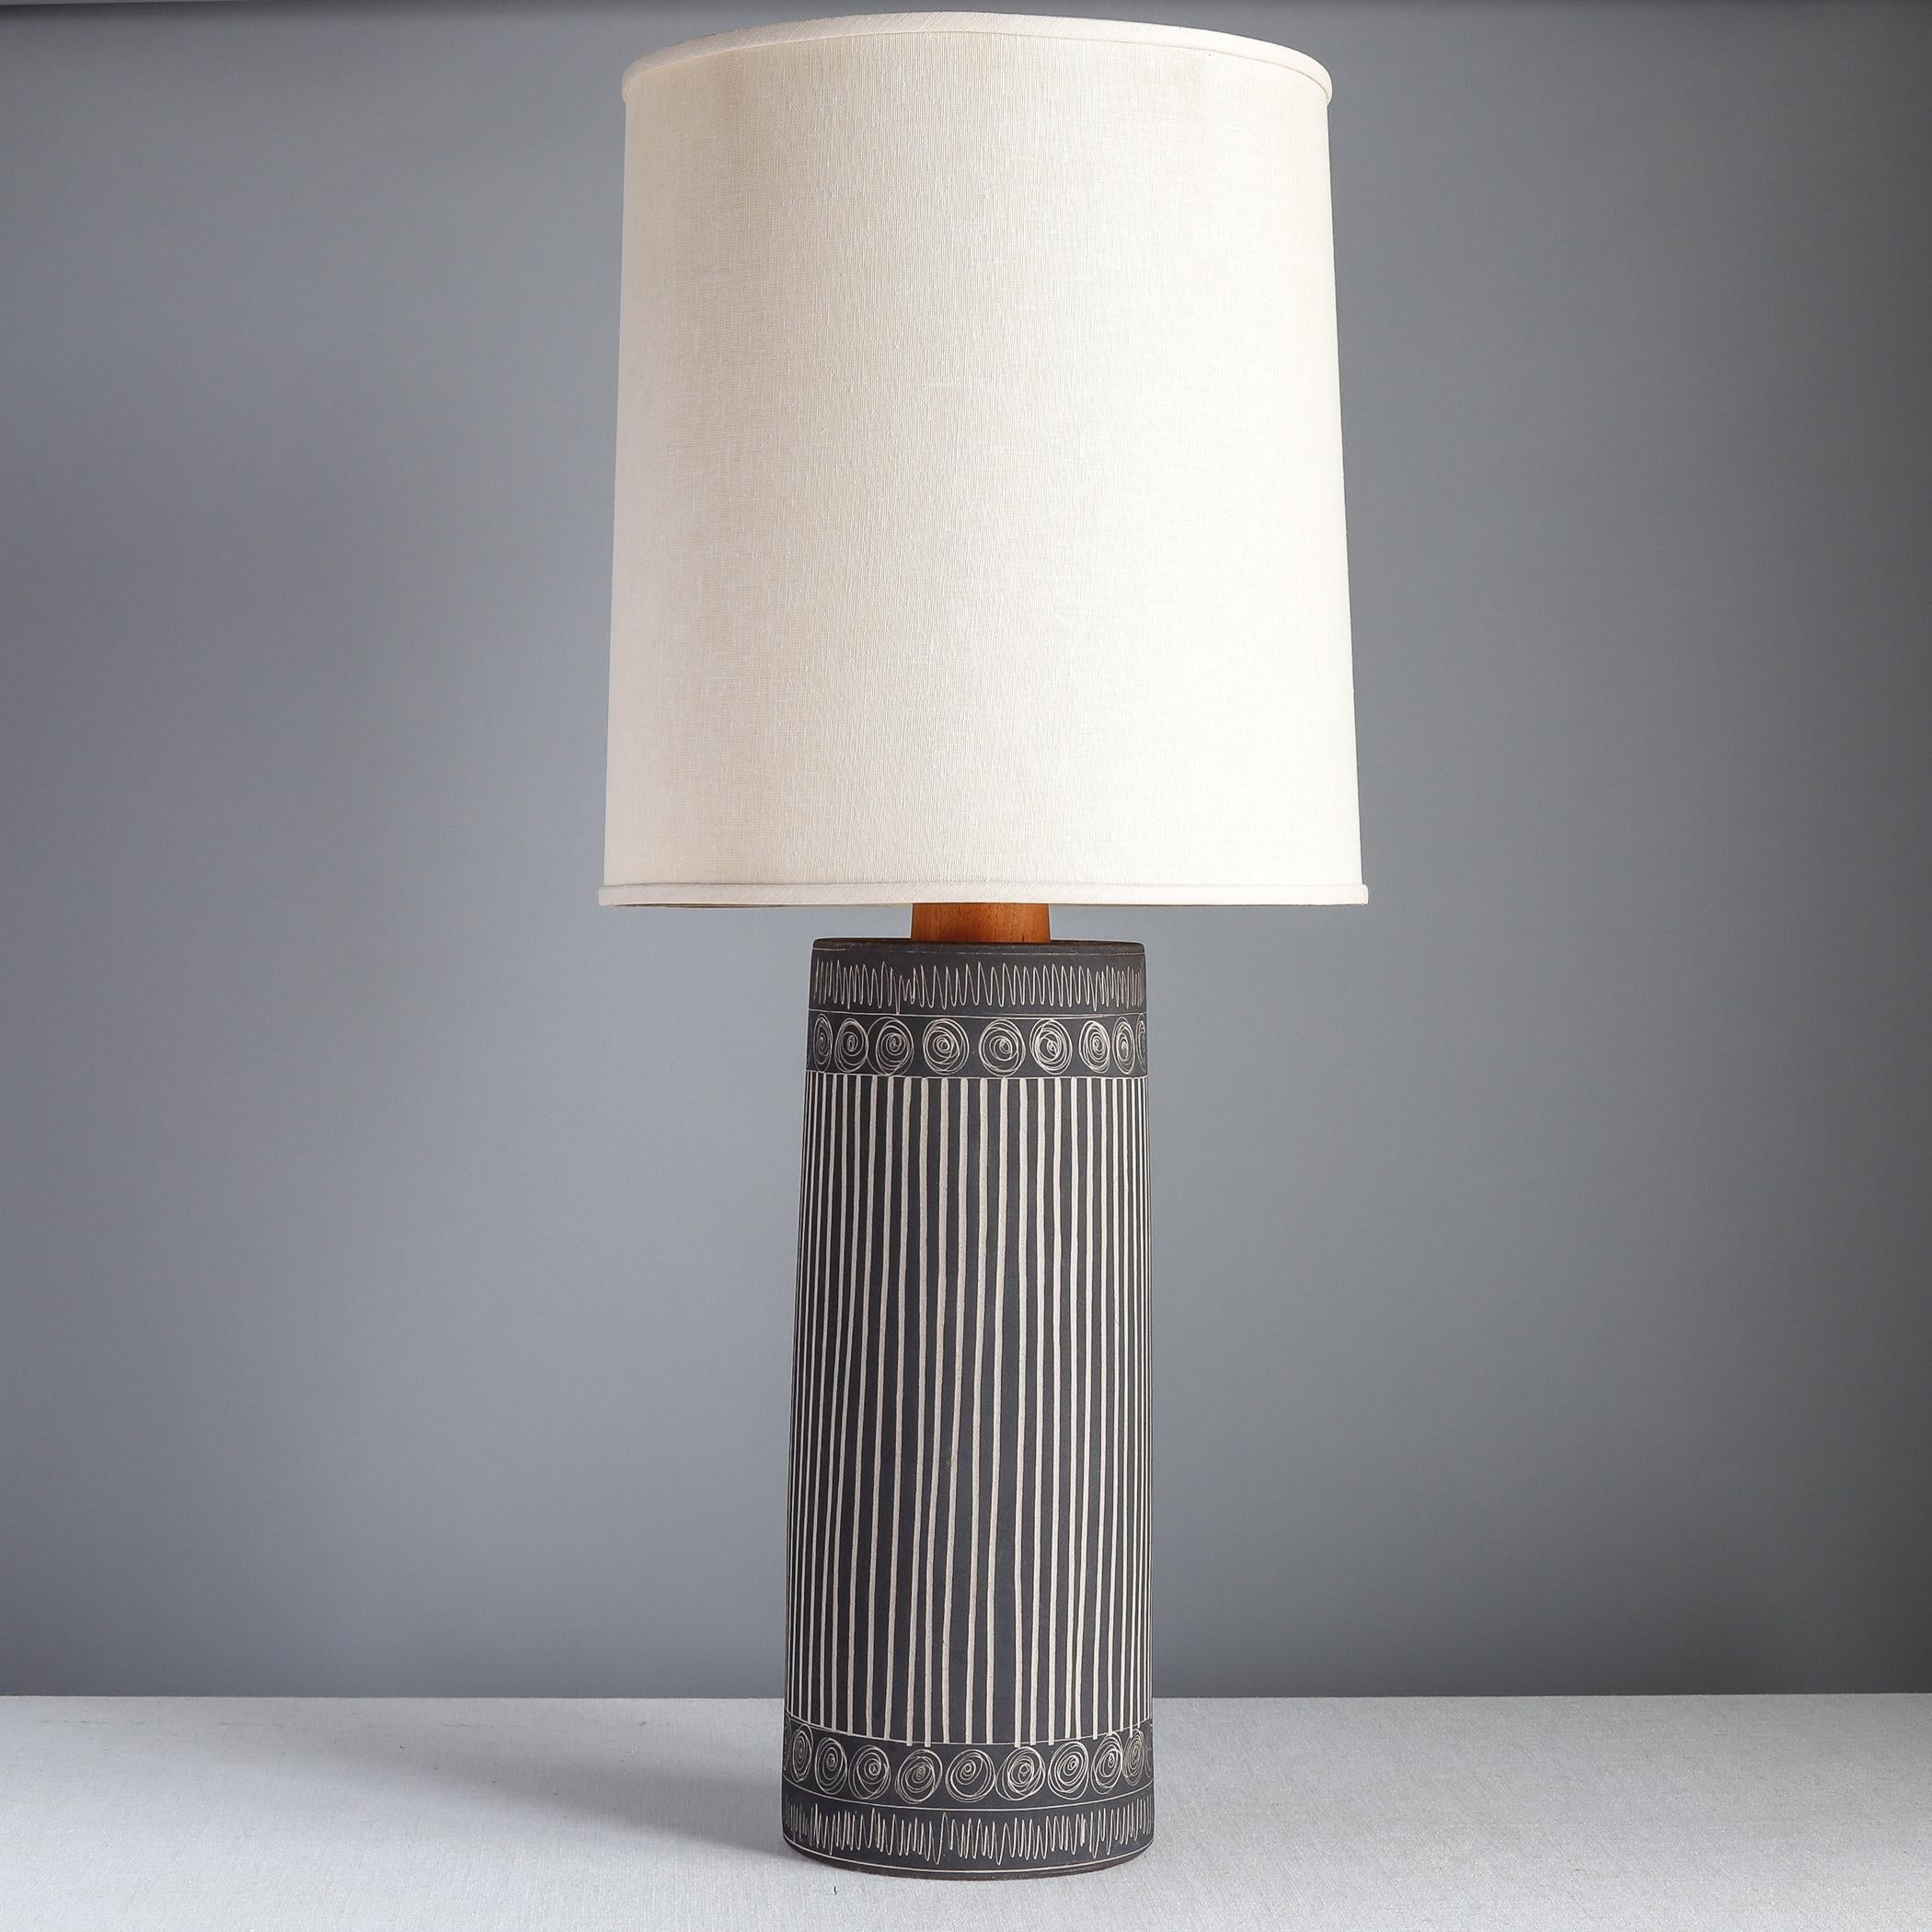 Mid-century ceramic table lamp designed by Jane and Gordon Martz for Marshall Studios of Veedersburg, Indiana. The stoneware body has a very matte dark gray glaze with hand-incised vertical lines and bands of round swirls. The neck of the lamp is